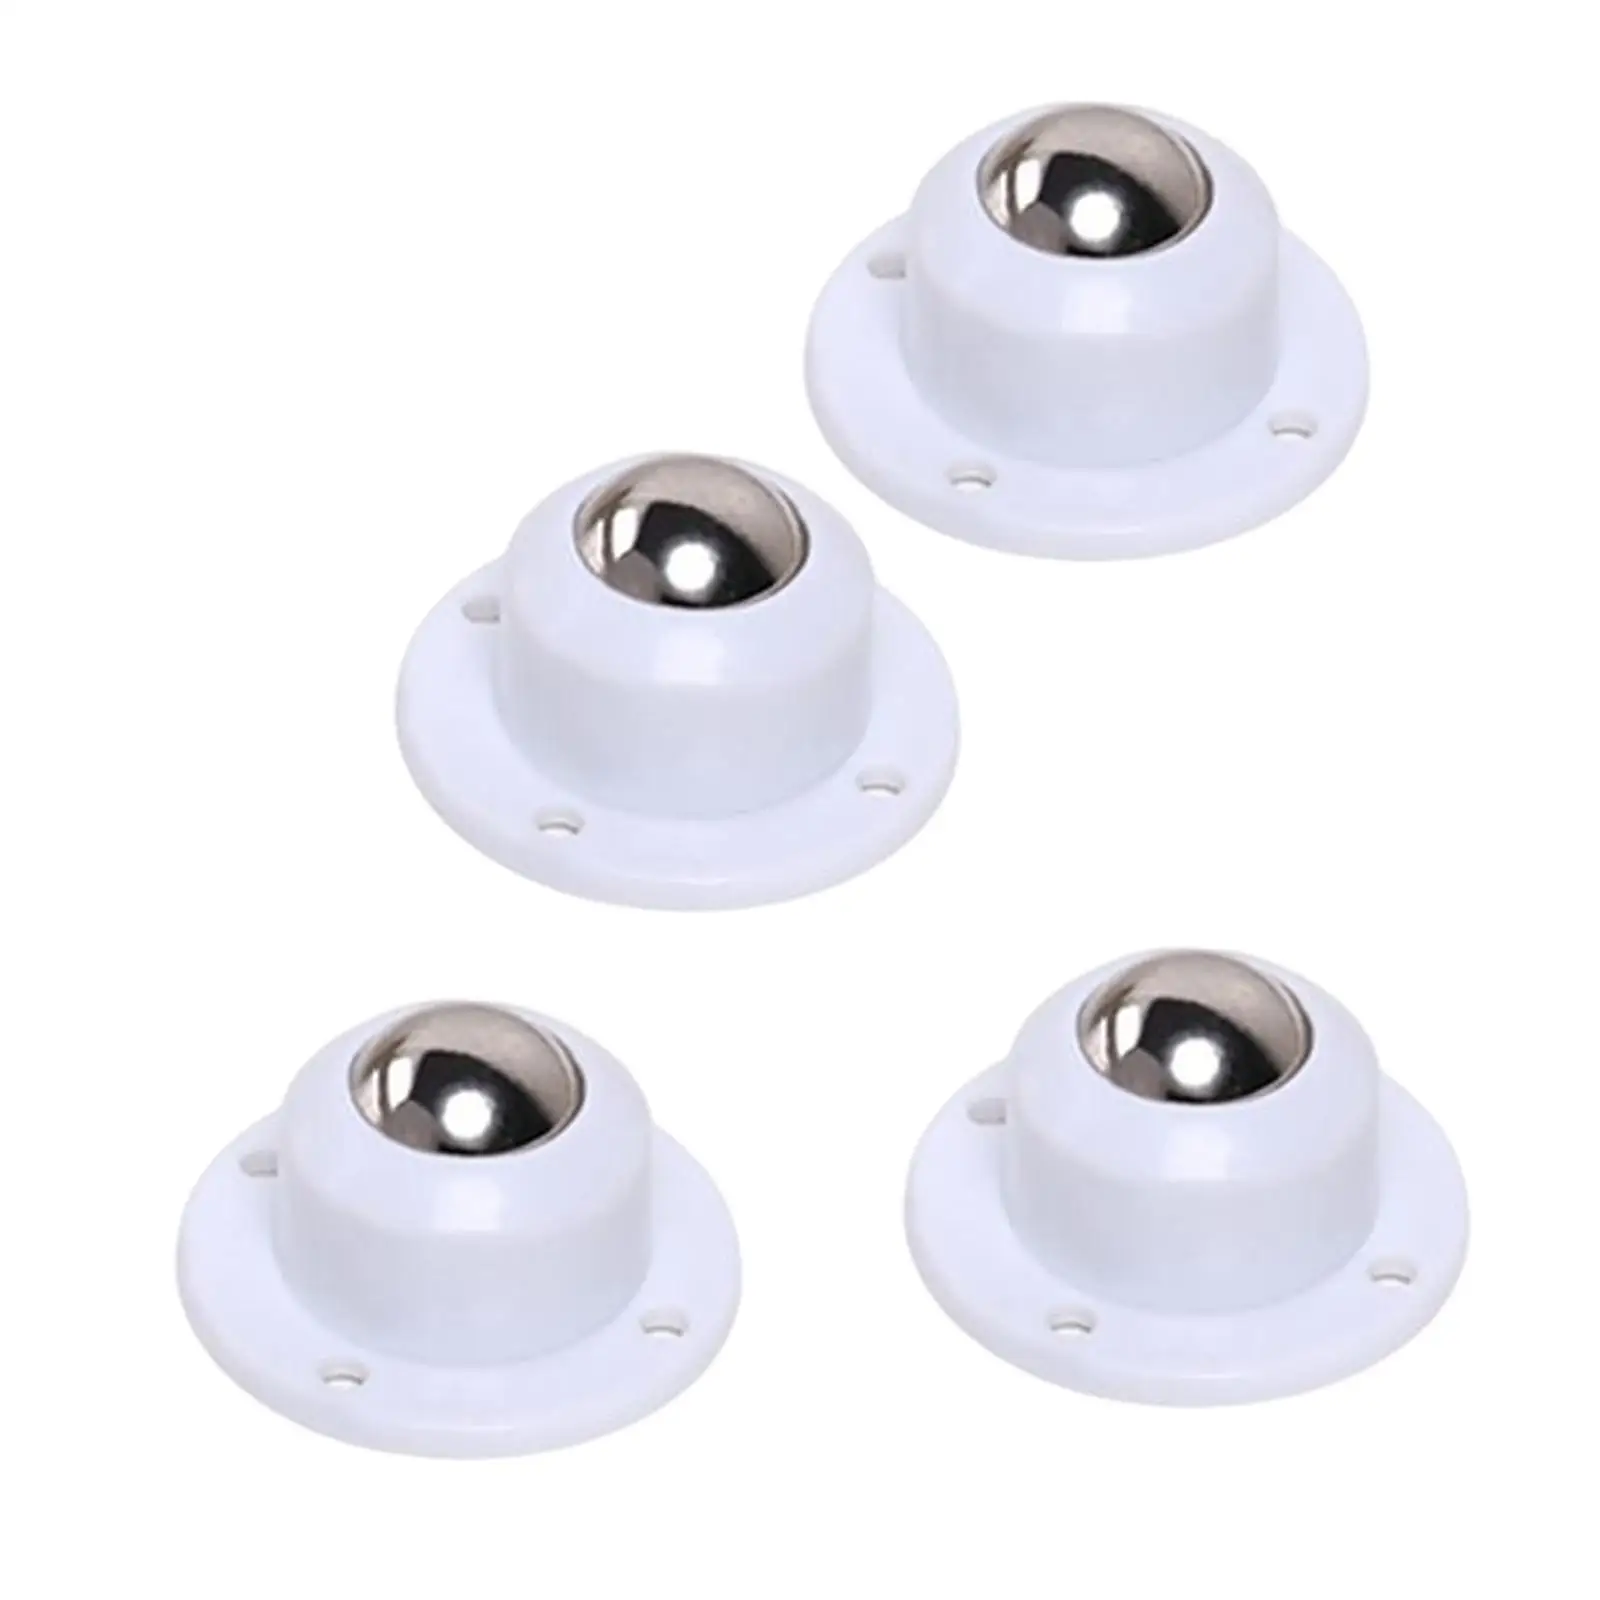 4x Mini Swivel Wheels Self Adhesive Stainless Steel Sticky for Trash Can